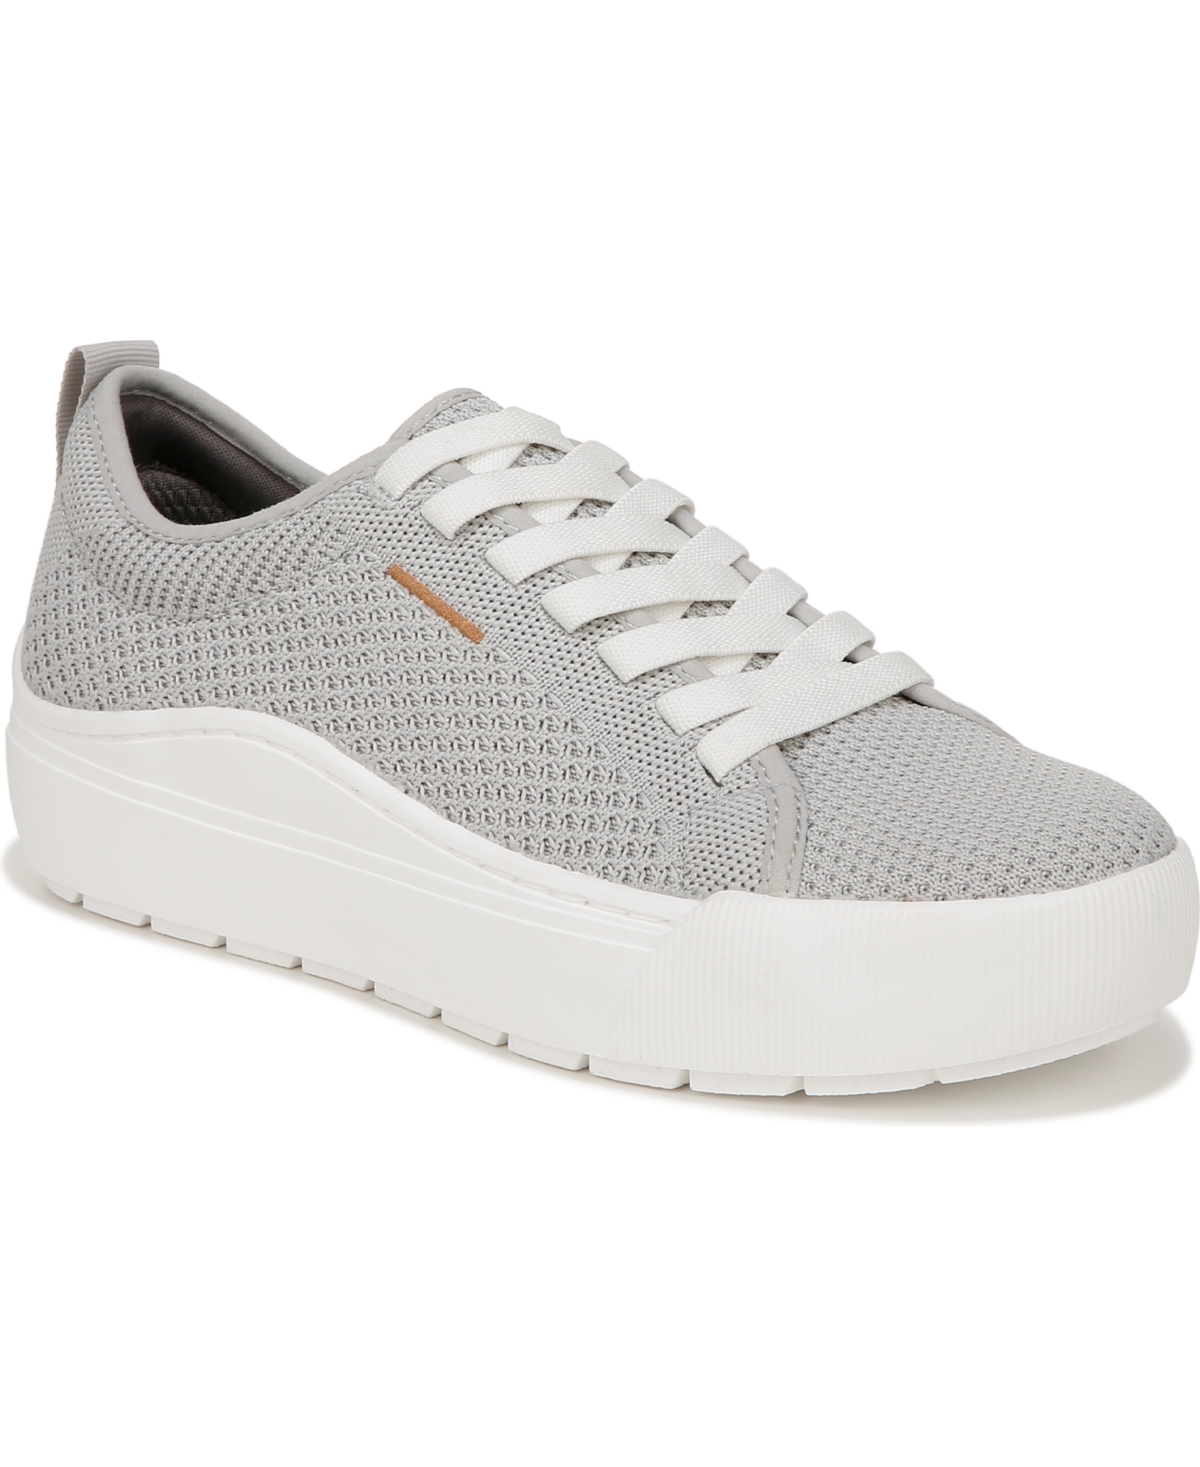 Dr. Scholl's Women's Time Off Knit Platform Trainers In Vapor Grey Knit Fabric